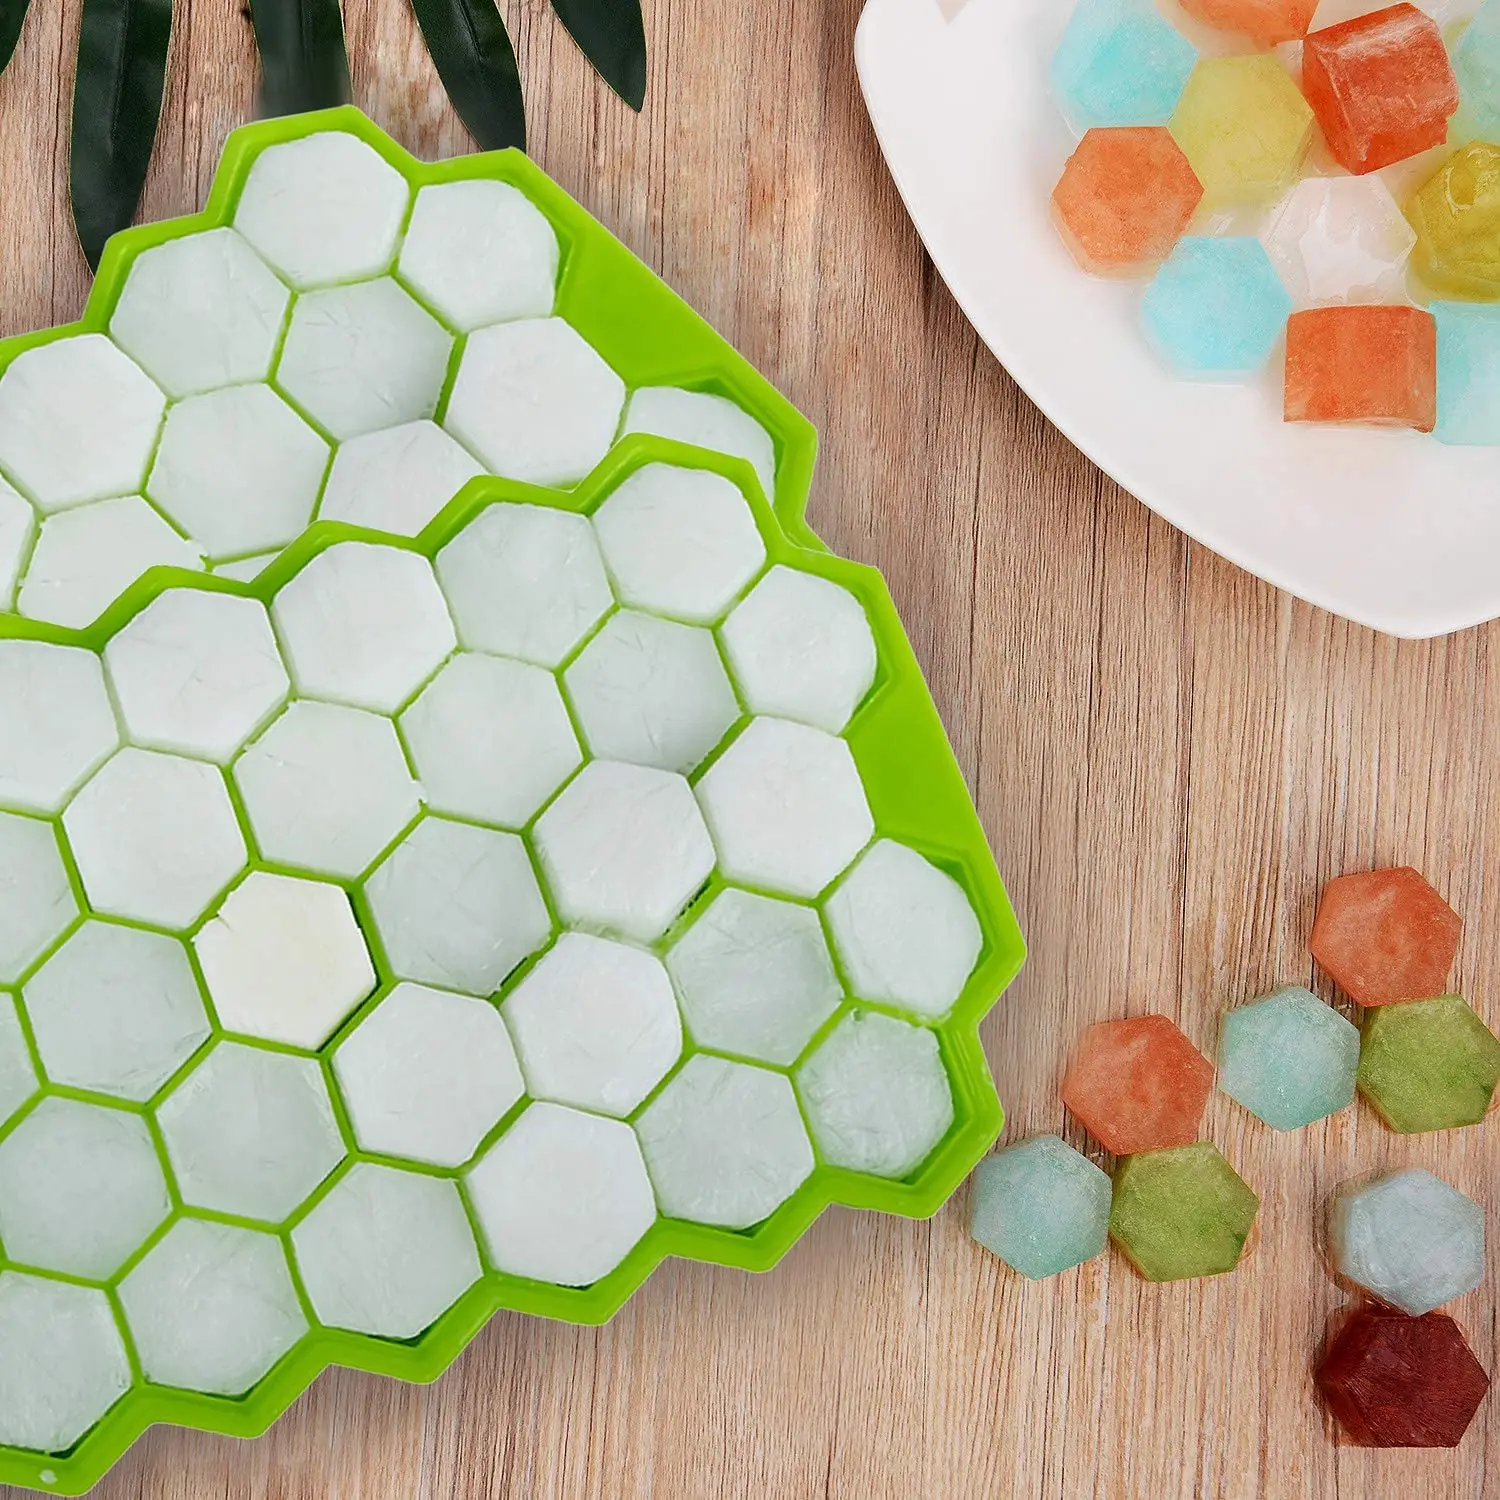 2021 Amazon Hot Sale 37 Grids Honeycomb Silicone Ice Cream Mold Tray with Silicone Lids for Cocktail, Freezer